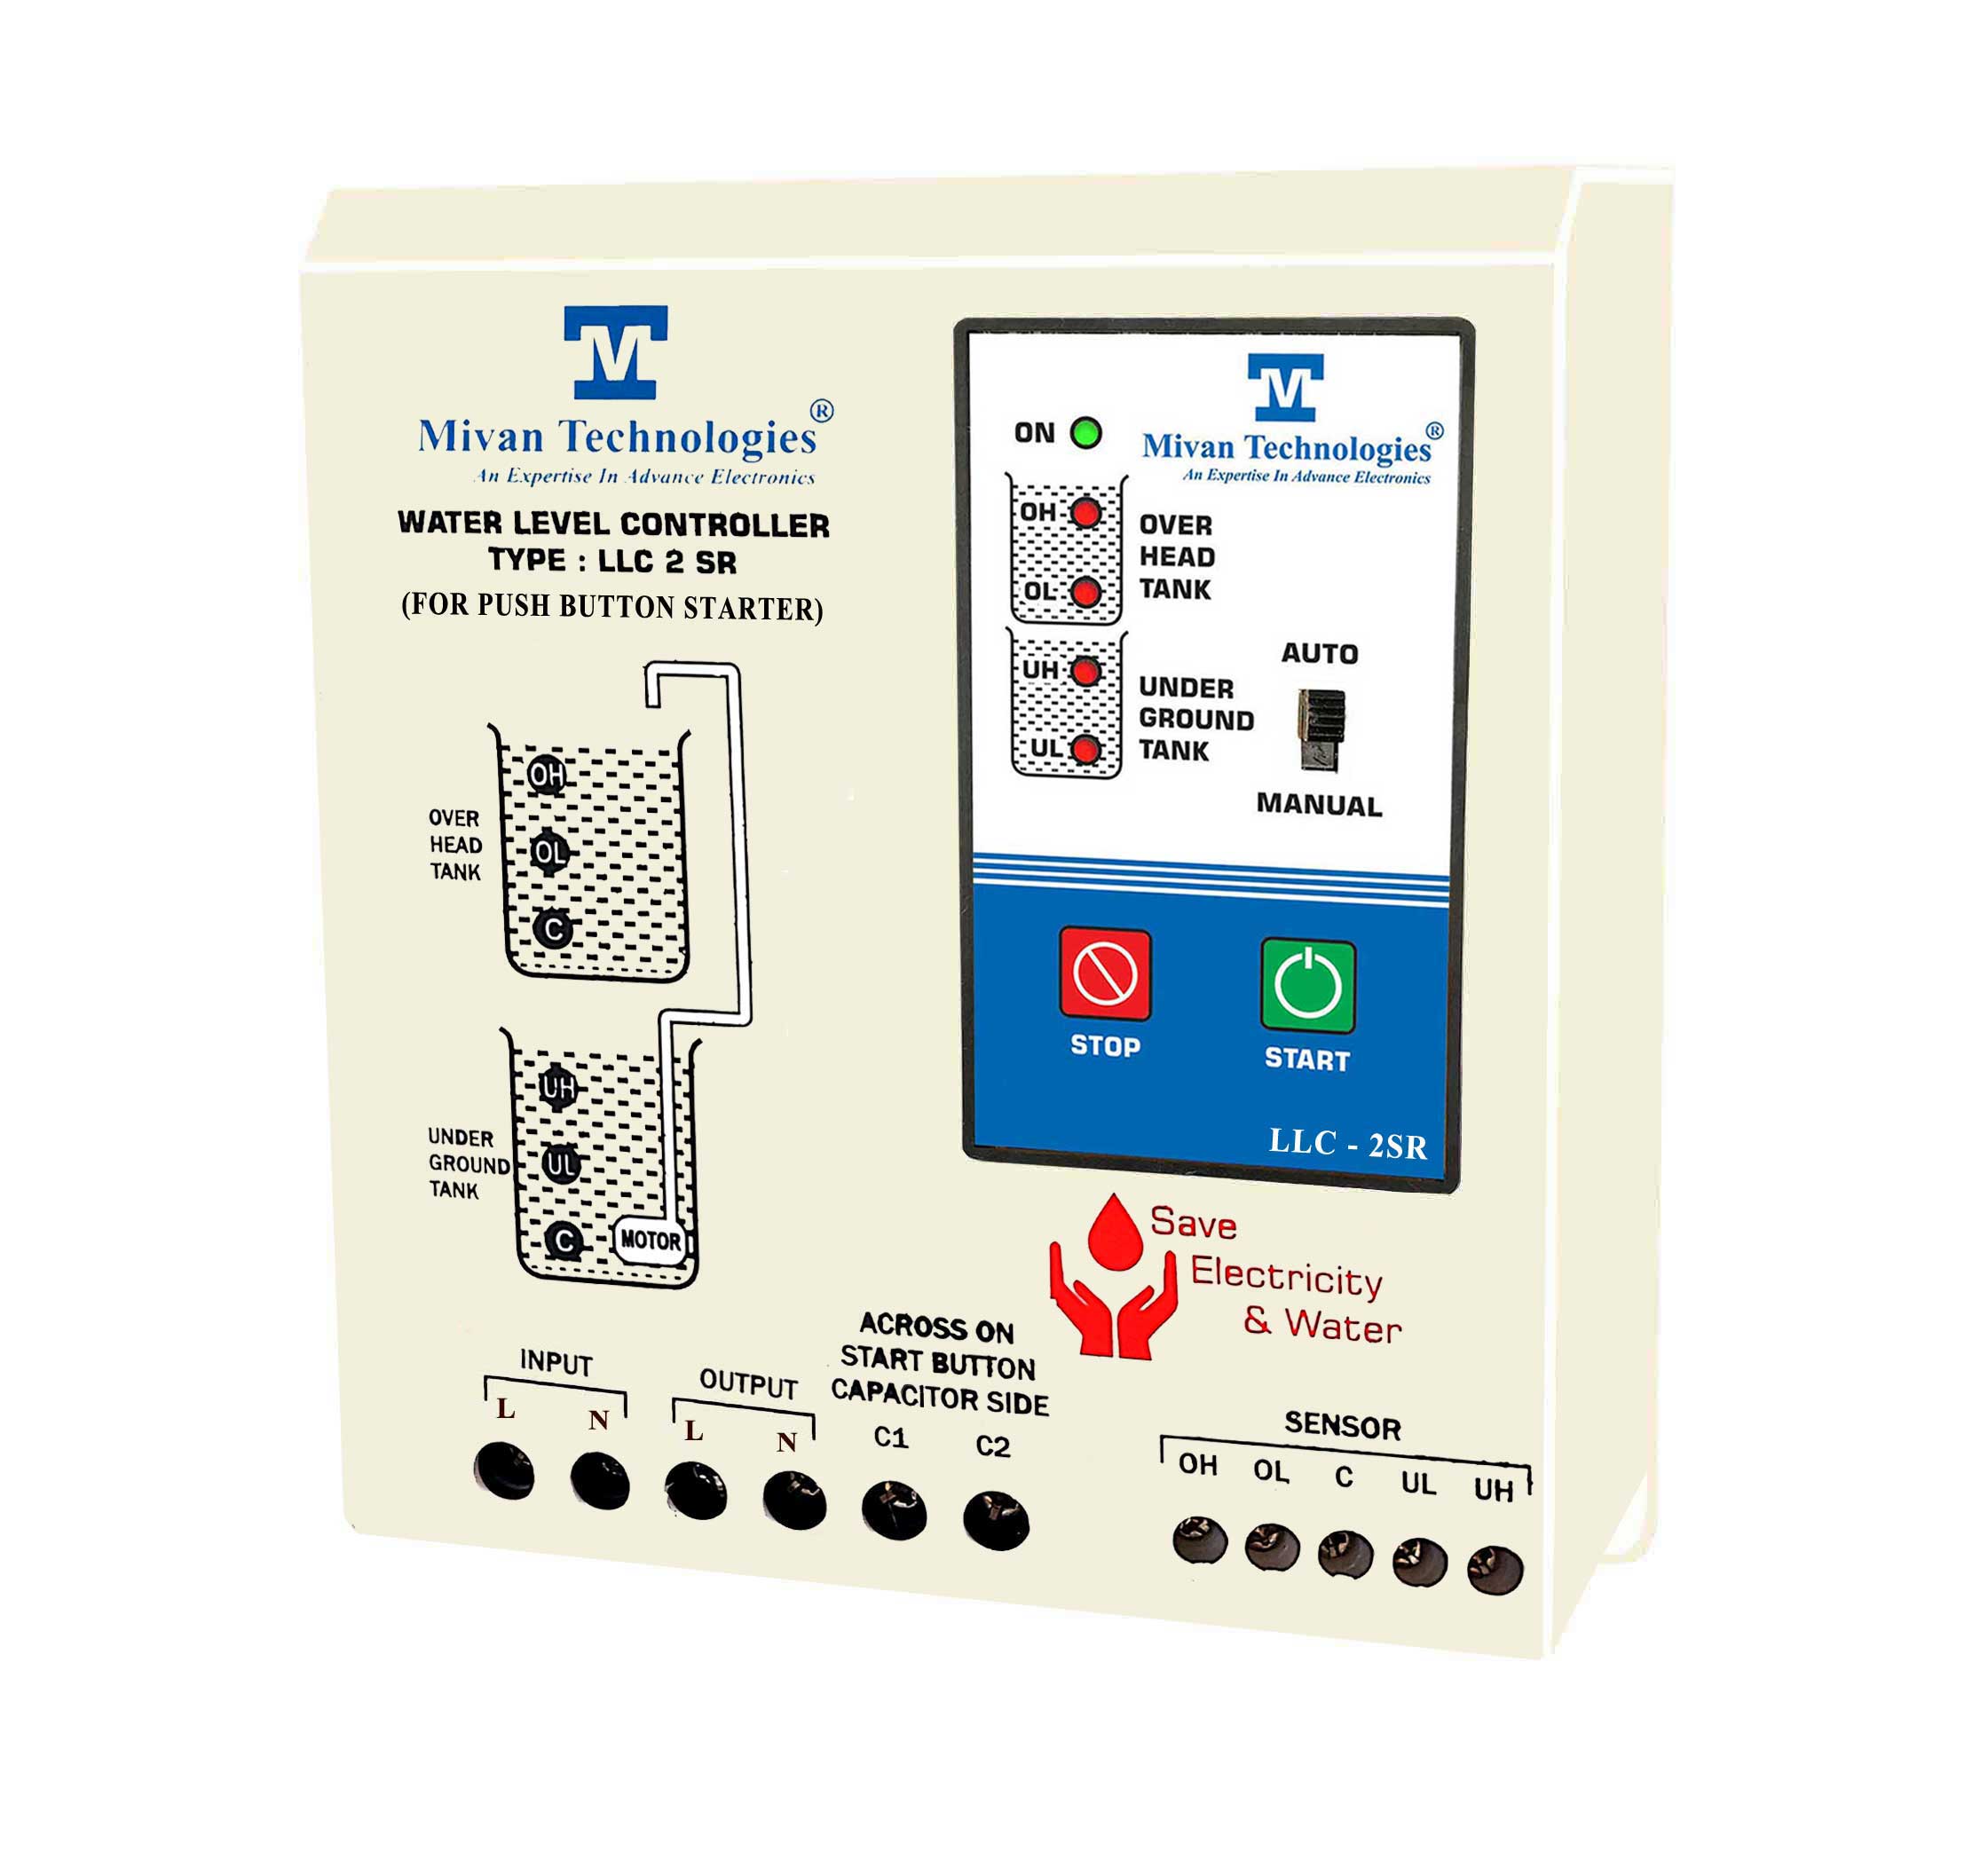 Water level controller for single phase push button type starter panel fully automatic with 6 sensors LLC 2SR